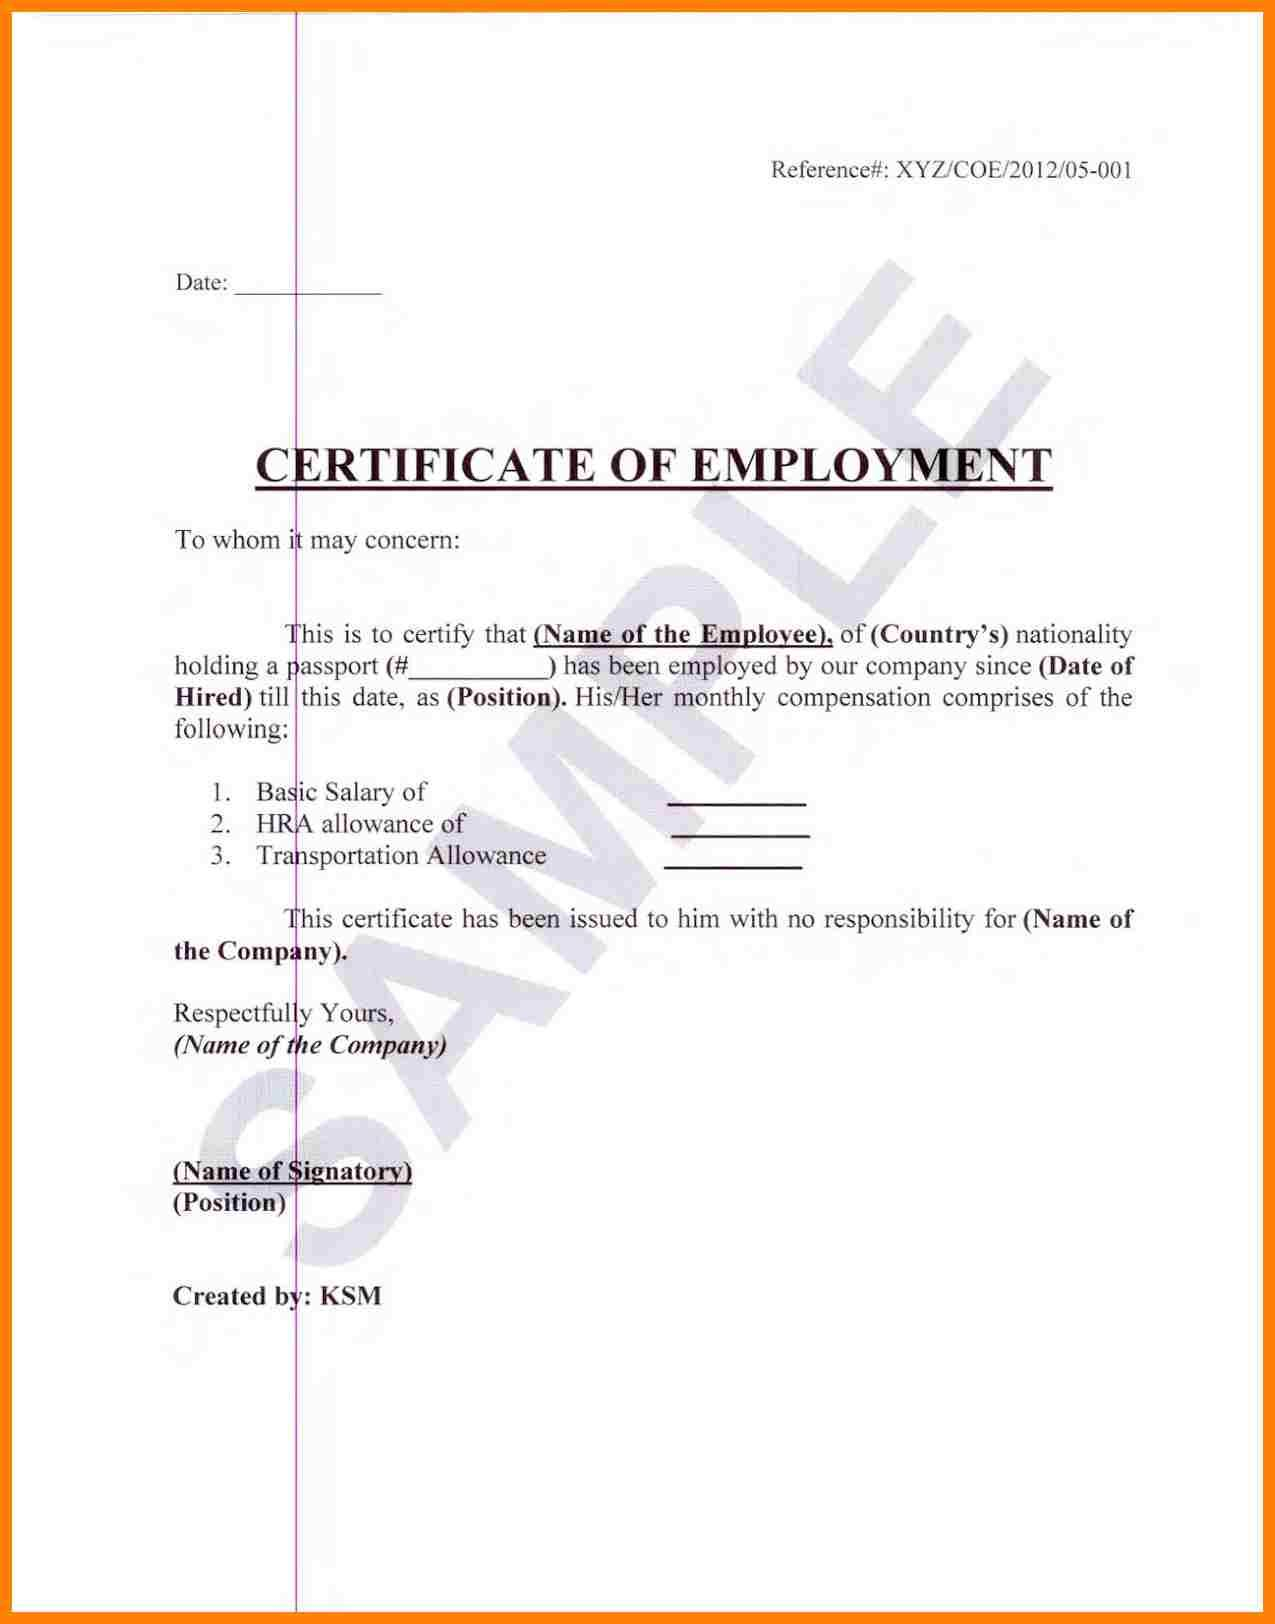 Sample Certificate Of Employment Certification Tugon Med For Sample Certificate Employment Template